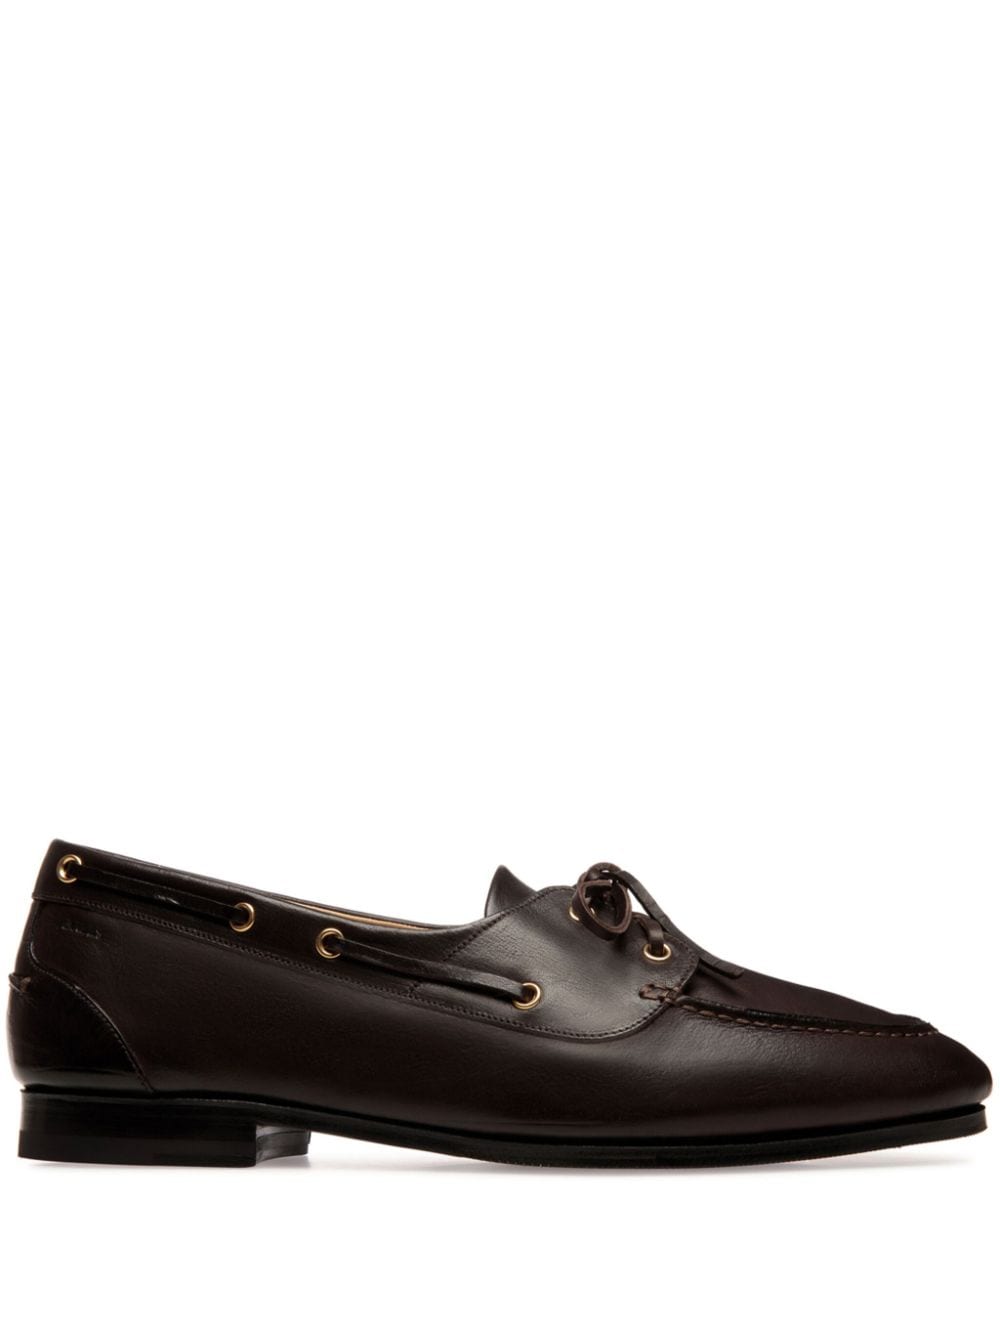 Bally Pathy leather derby shoes - Brown von Bally